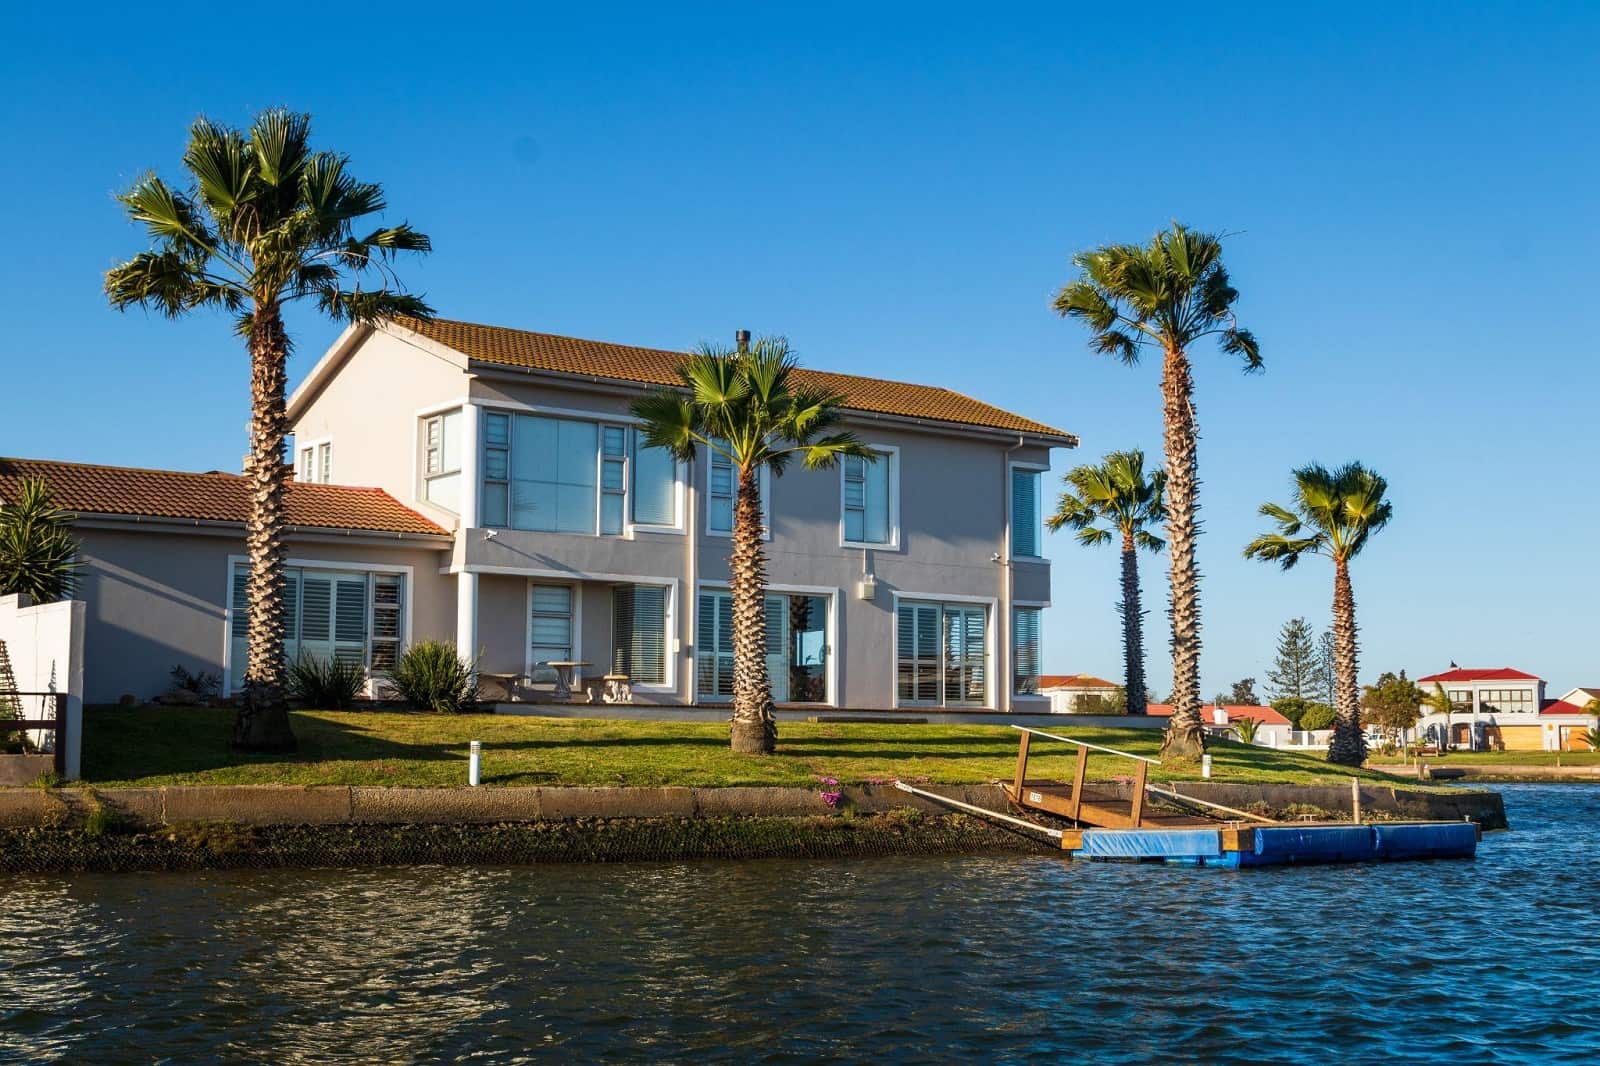 6 Essential Tips for Building a Vacation Home